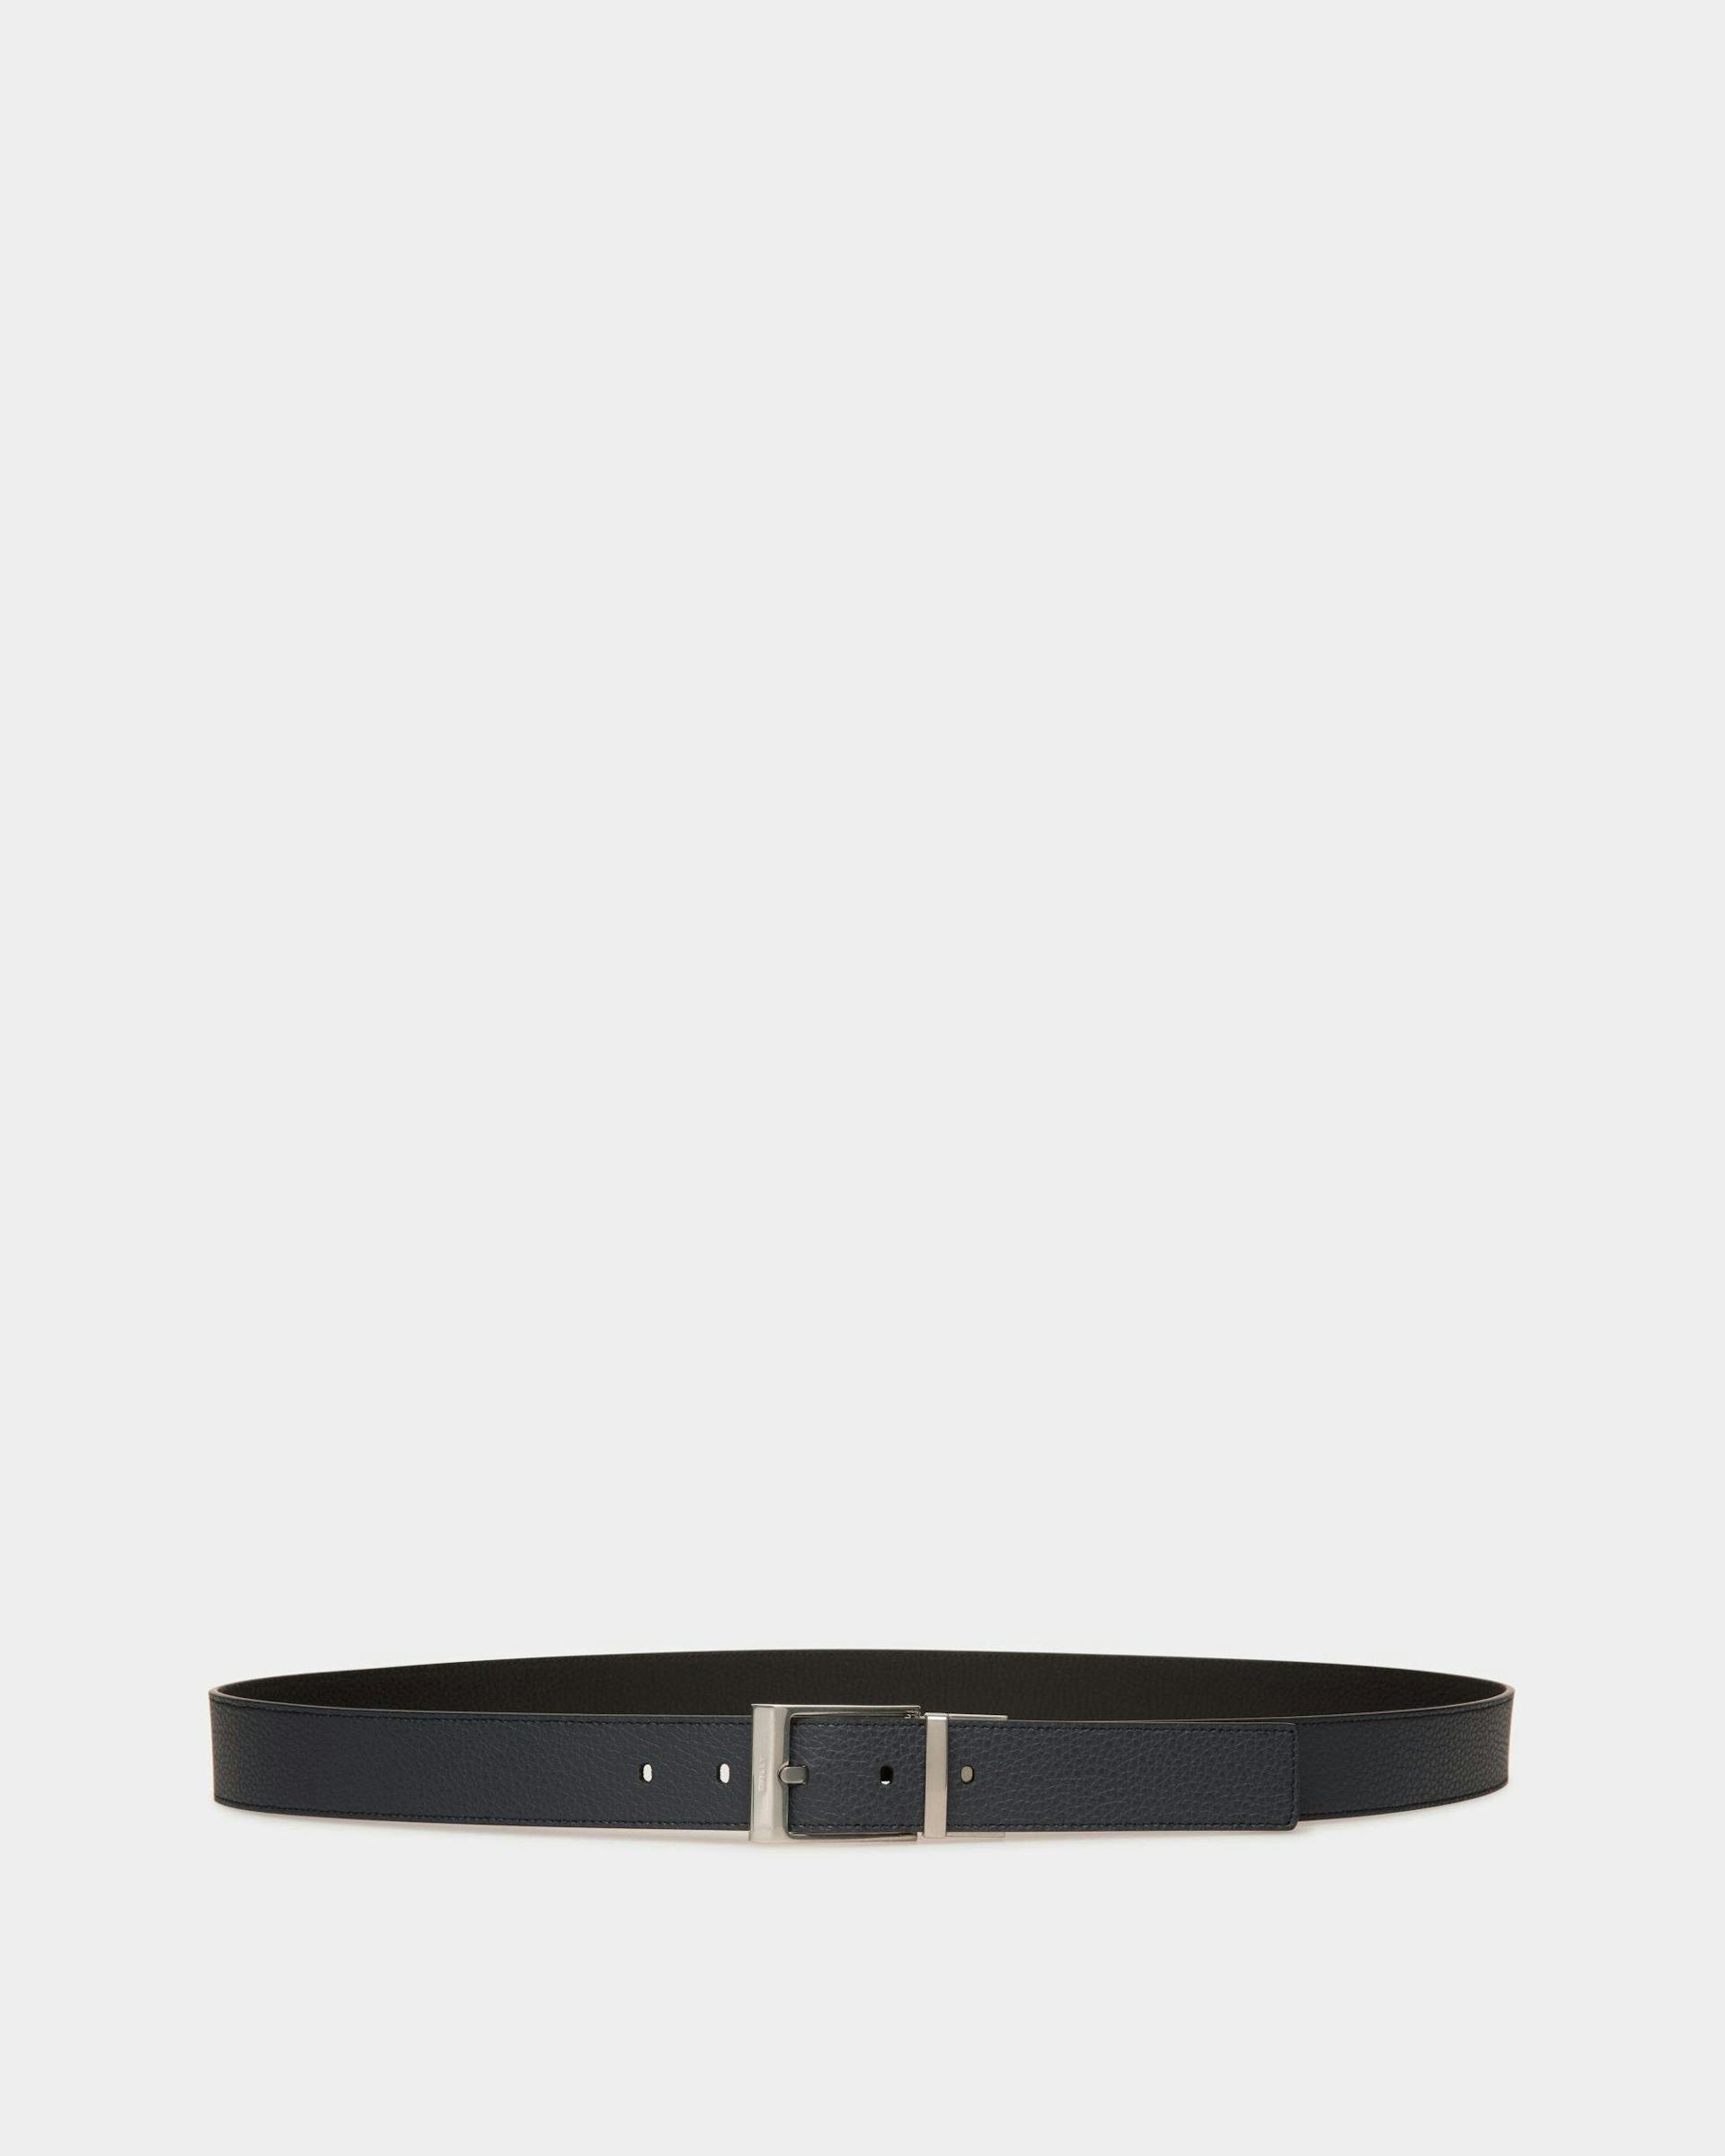 Shiffie 35 | Men's Adjustable And Reversible Belt | Midnight And Black ...